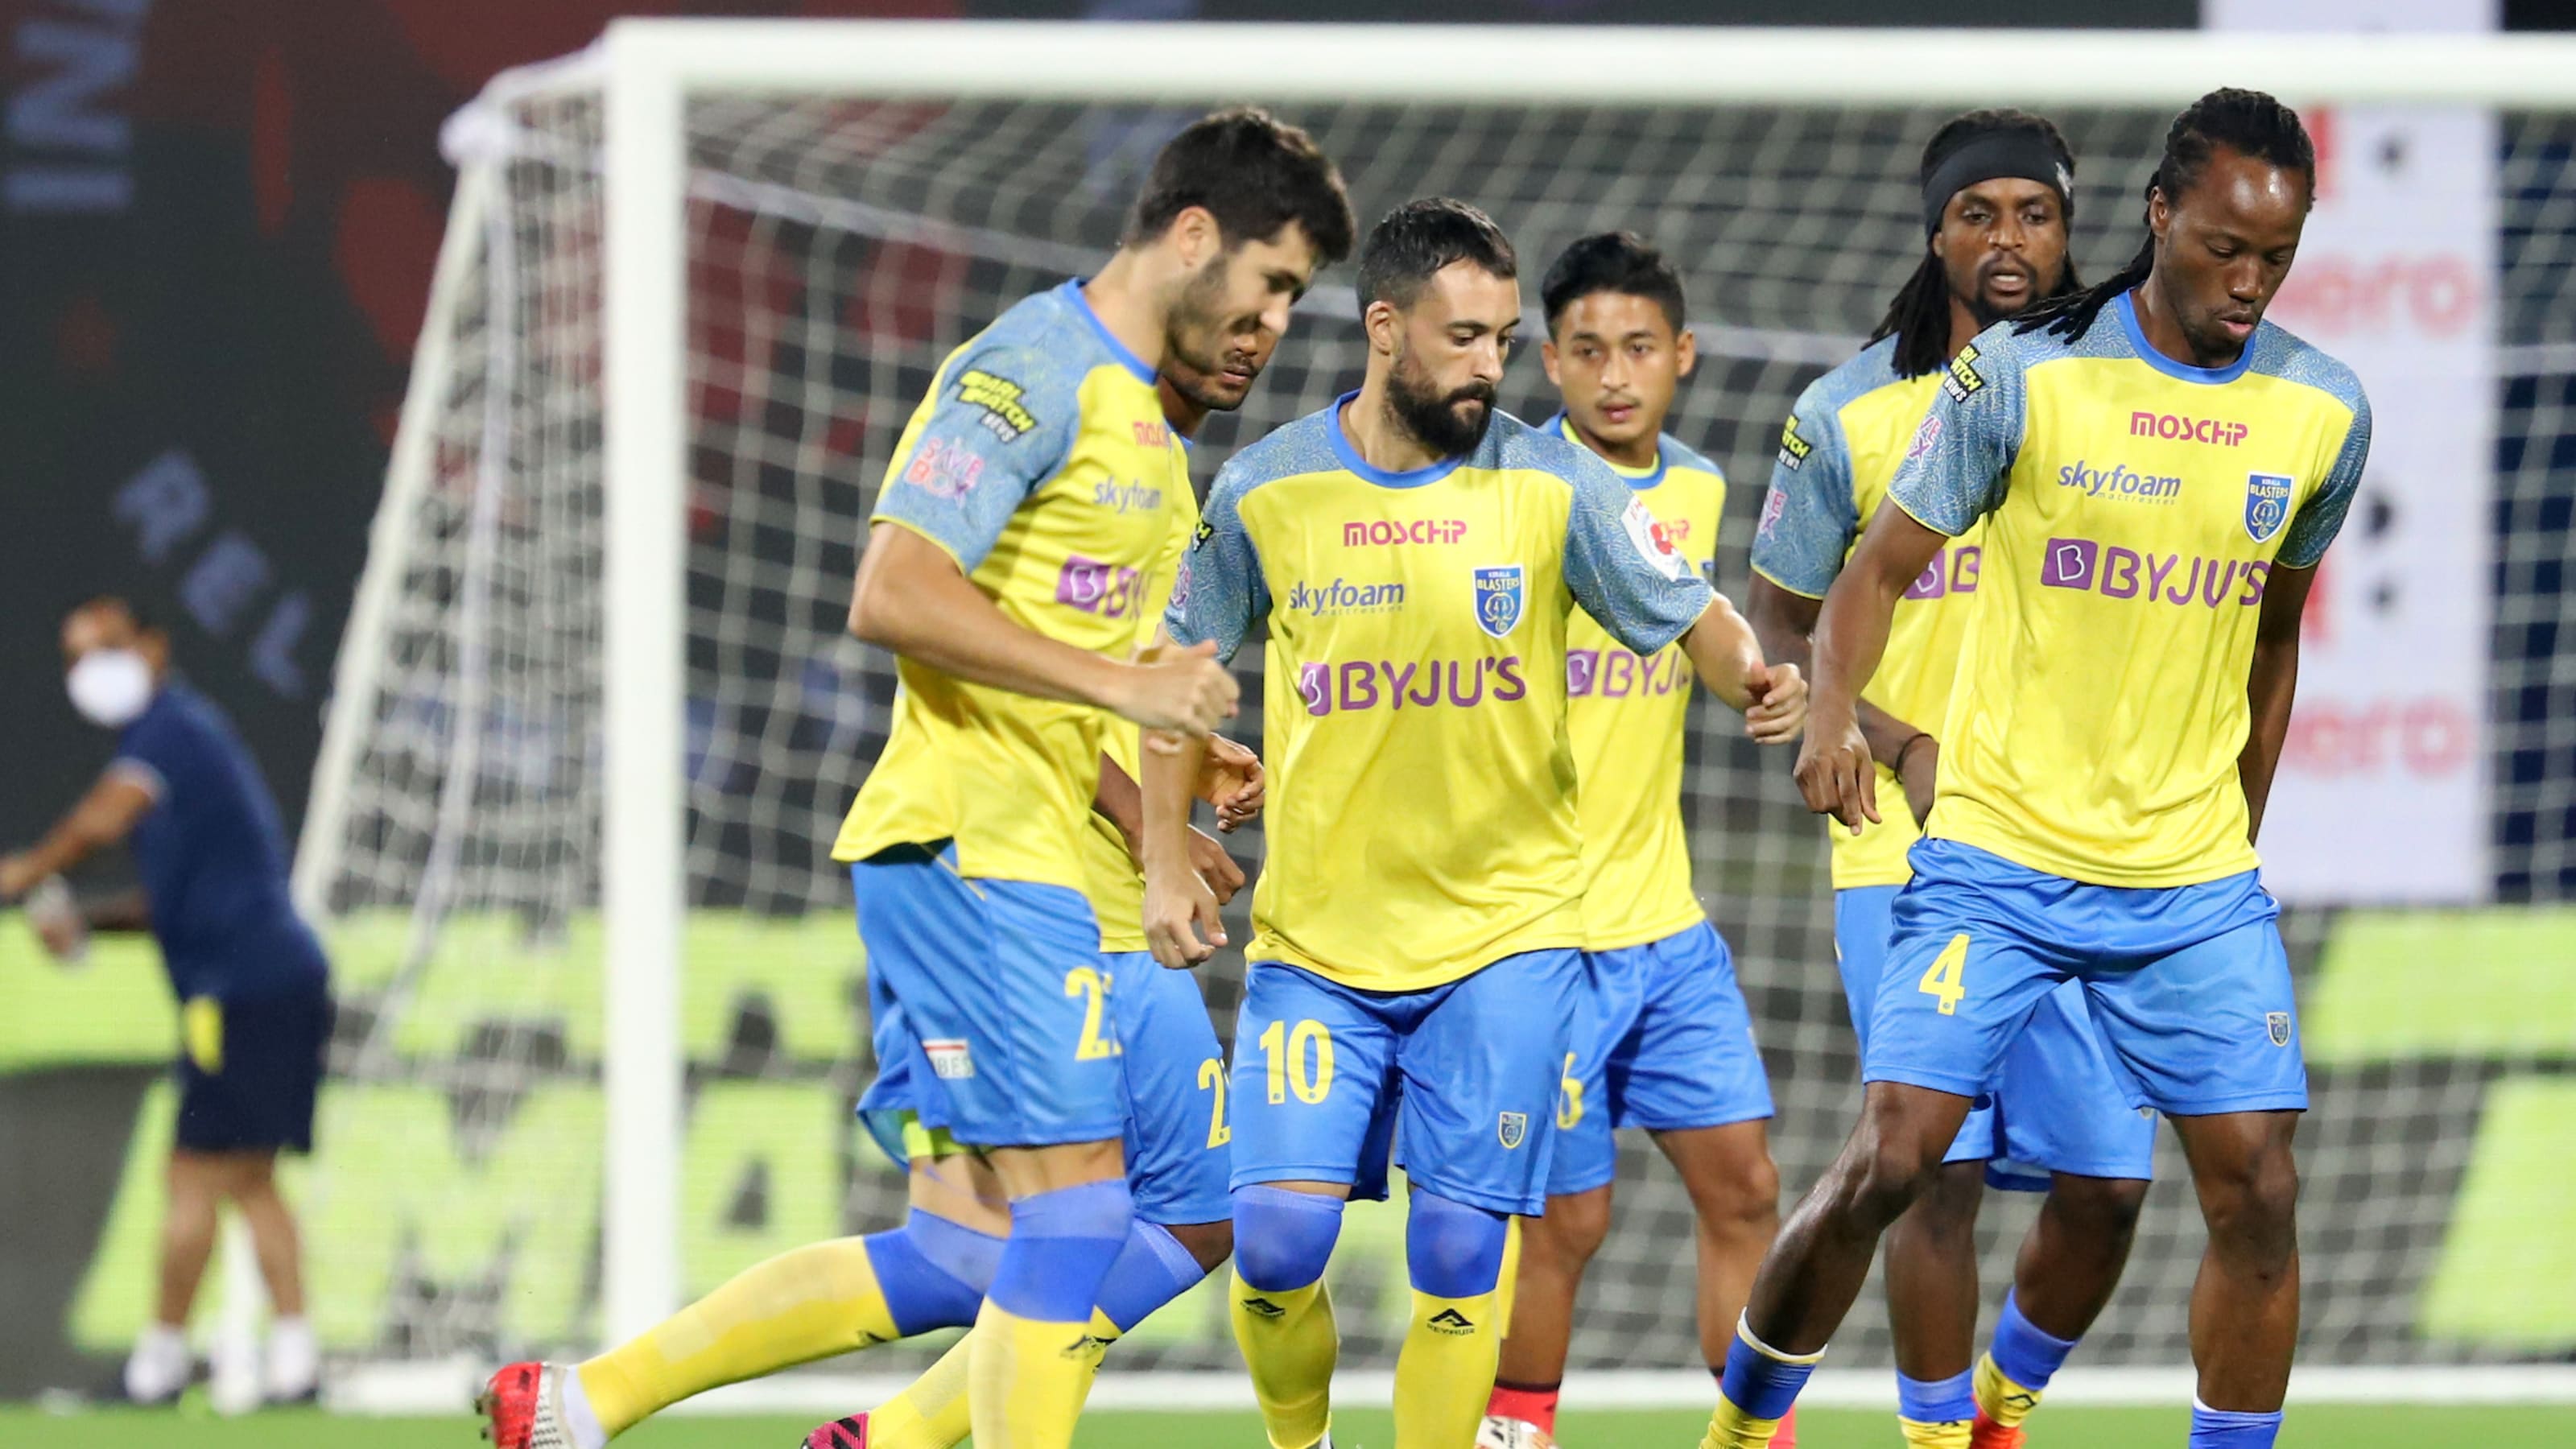 Chennaiyin FC vs Kerala Blasters, ISL 2020-21 round 3 schedule and  fixtures, and where to watch live streaming in India